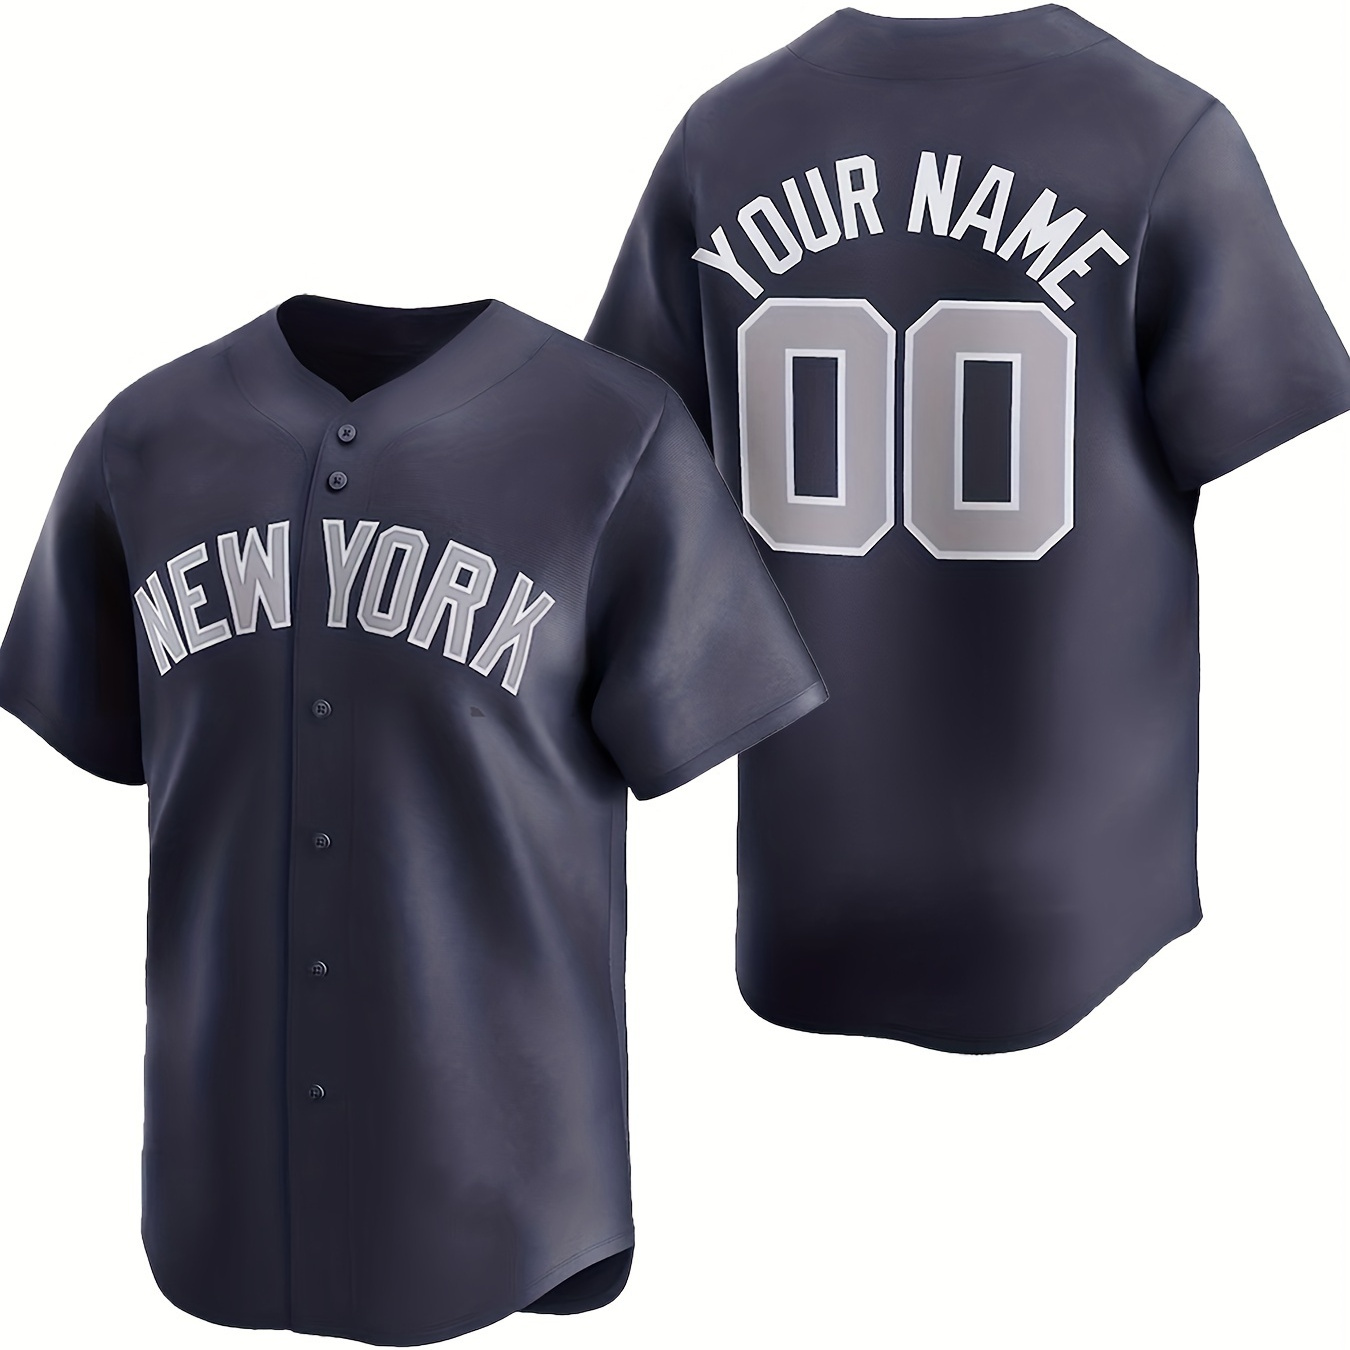 

Men's Personalized Custom Name And Number Design Baseball Jersey, New York Pattern Sports Daily Leisure Button Up Jersey Shirt For Match Party Training